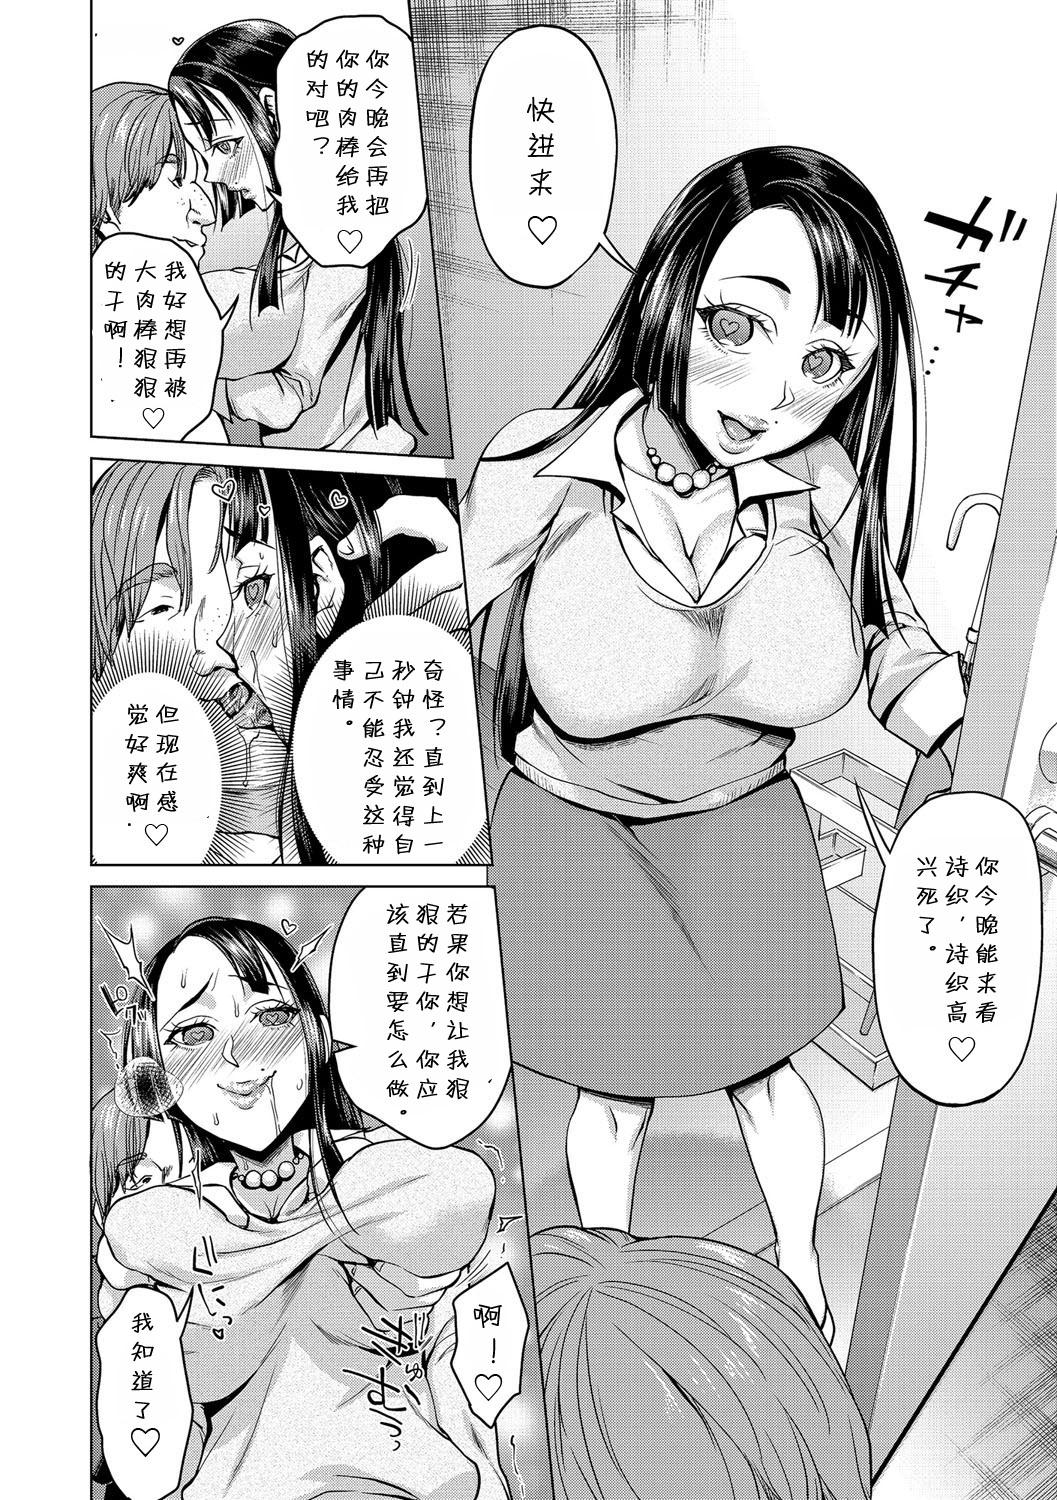 Anal Porn Saimin Kyousei Love Love Tanetsuke | Mind Controlled Lovey Dovey Baby Making Mamada - Page 7